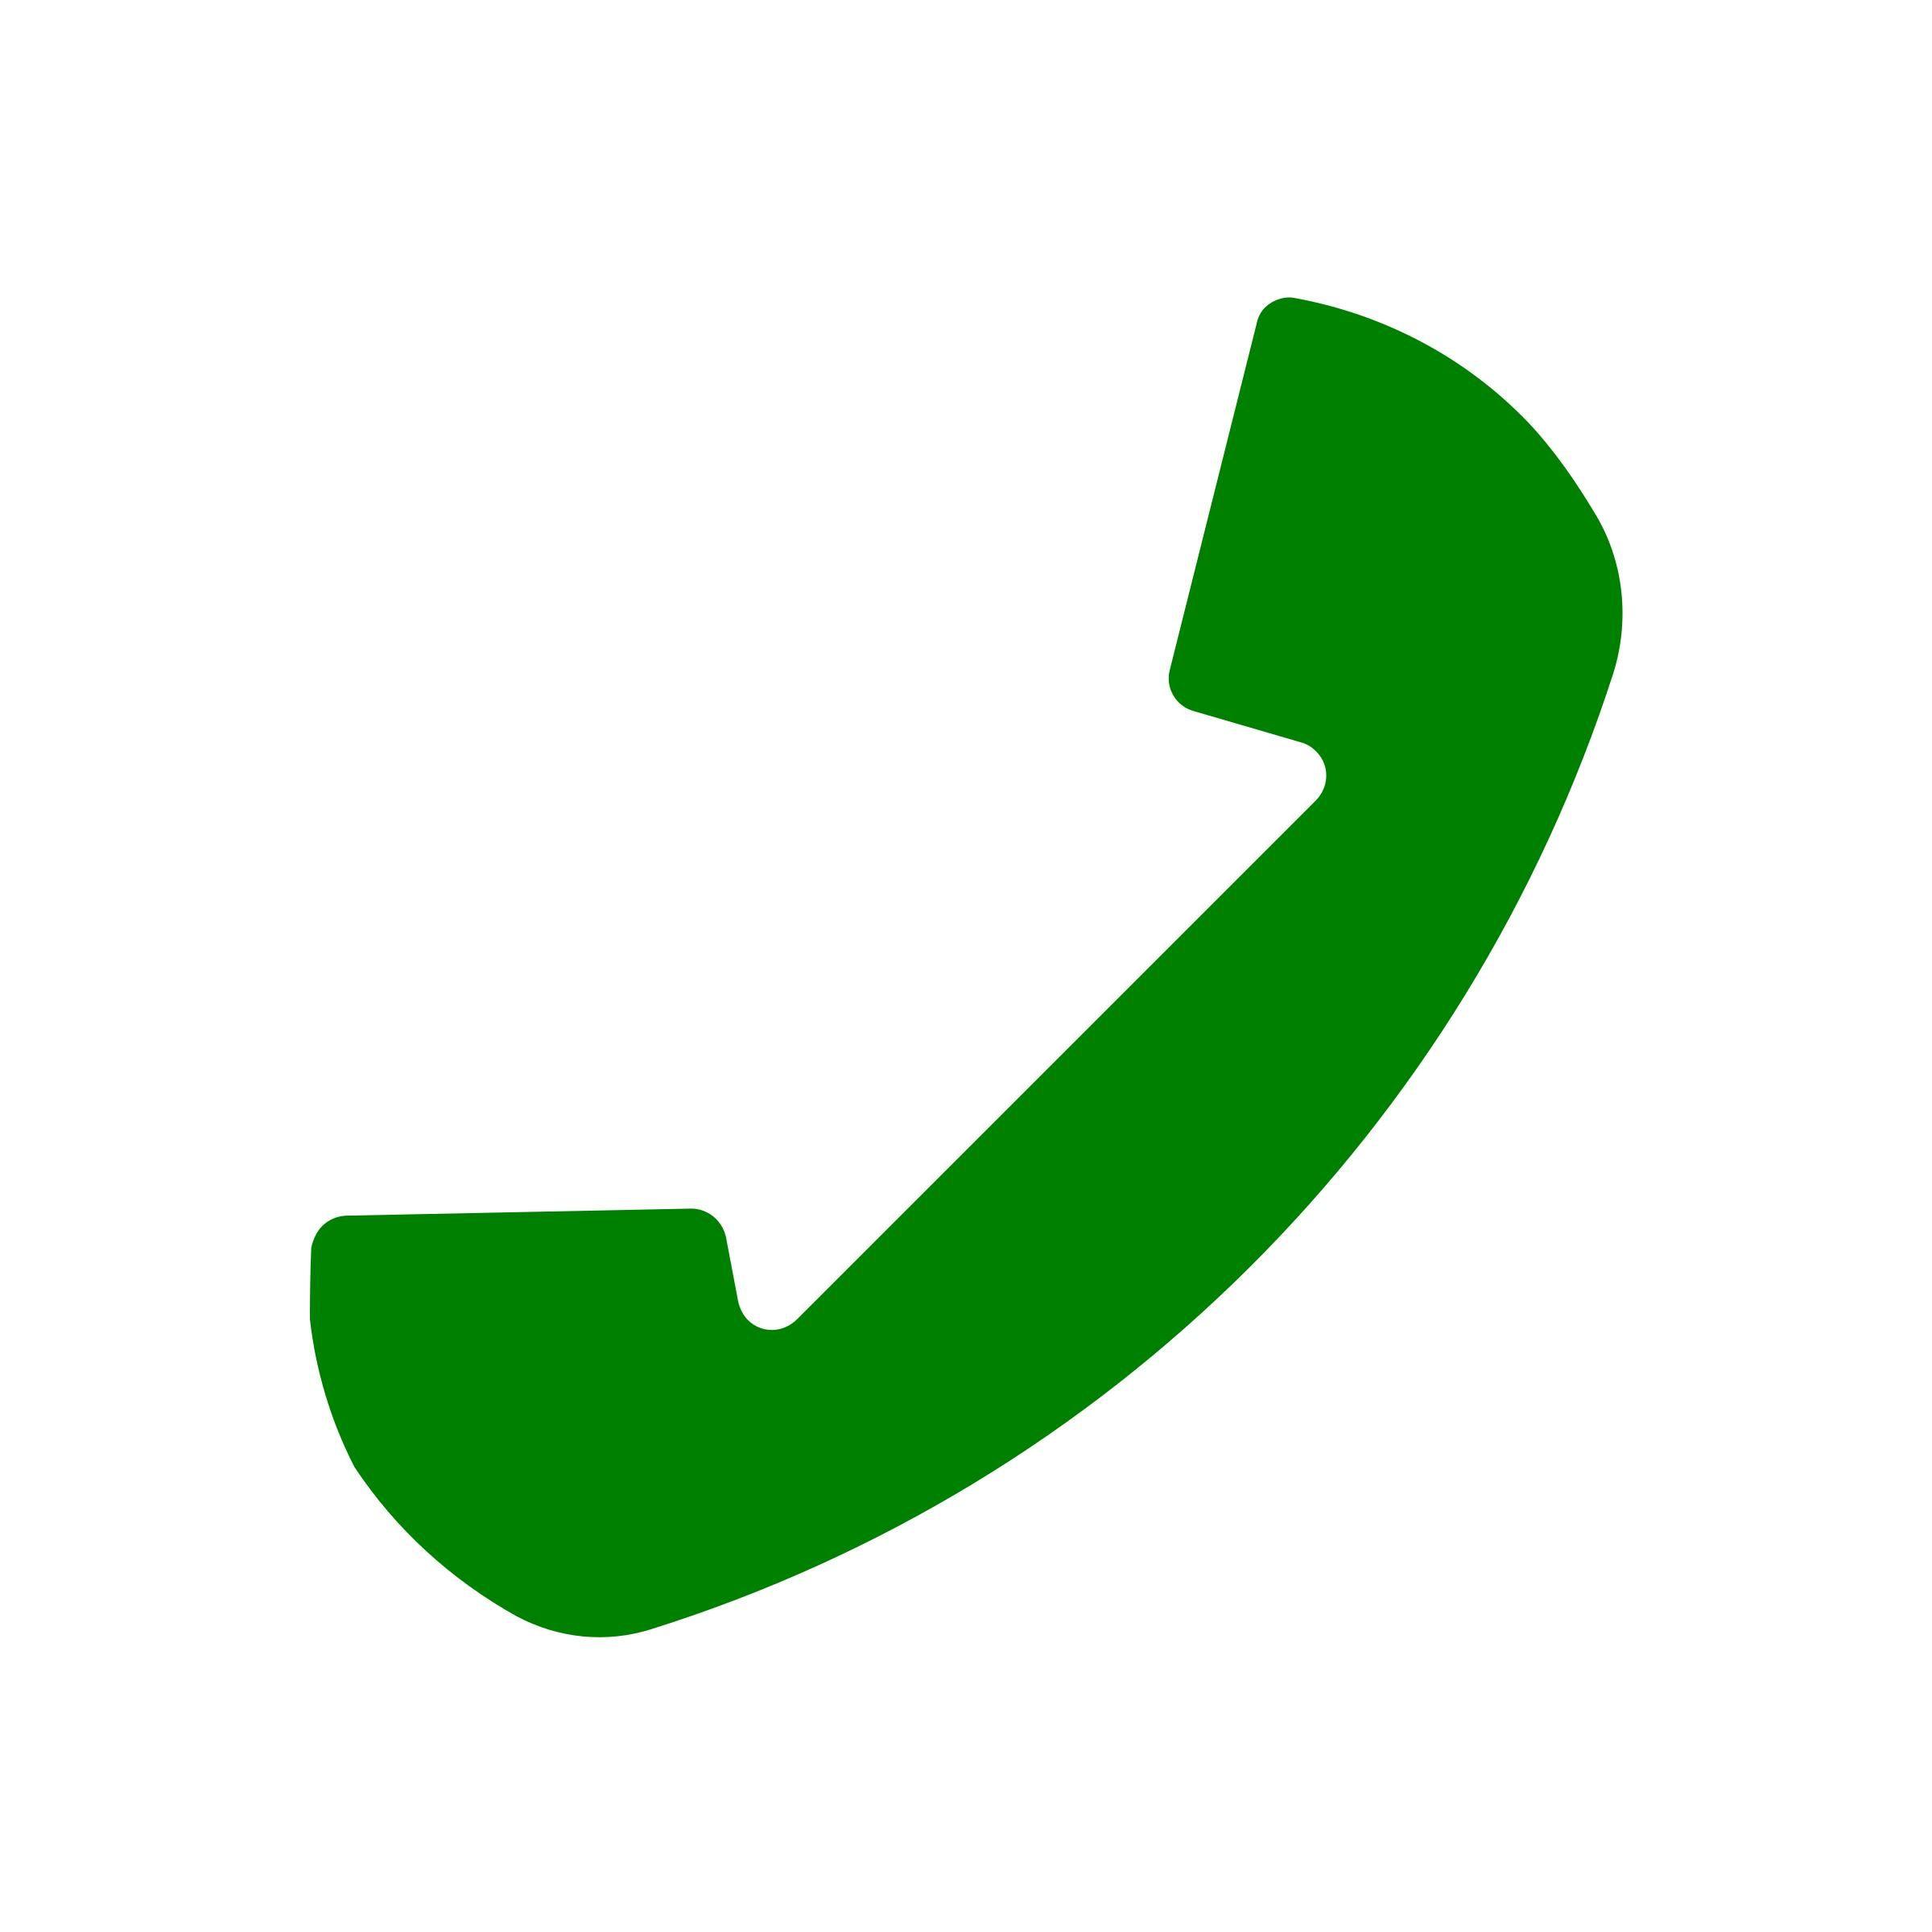 White and Green Phone Logo - Android Phone white Icon PNG PNG and Icon Downloads